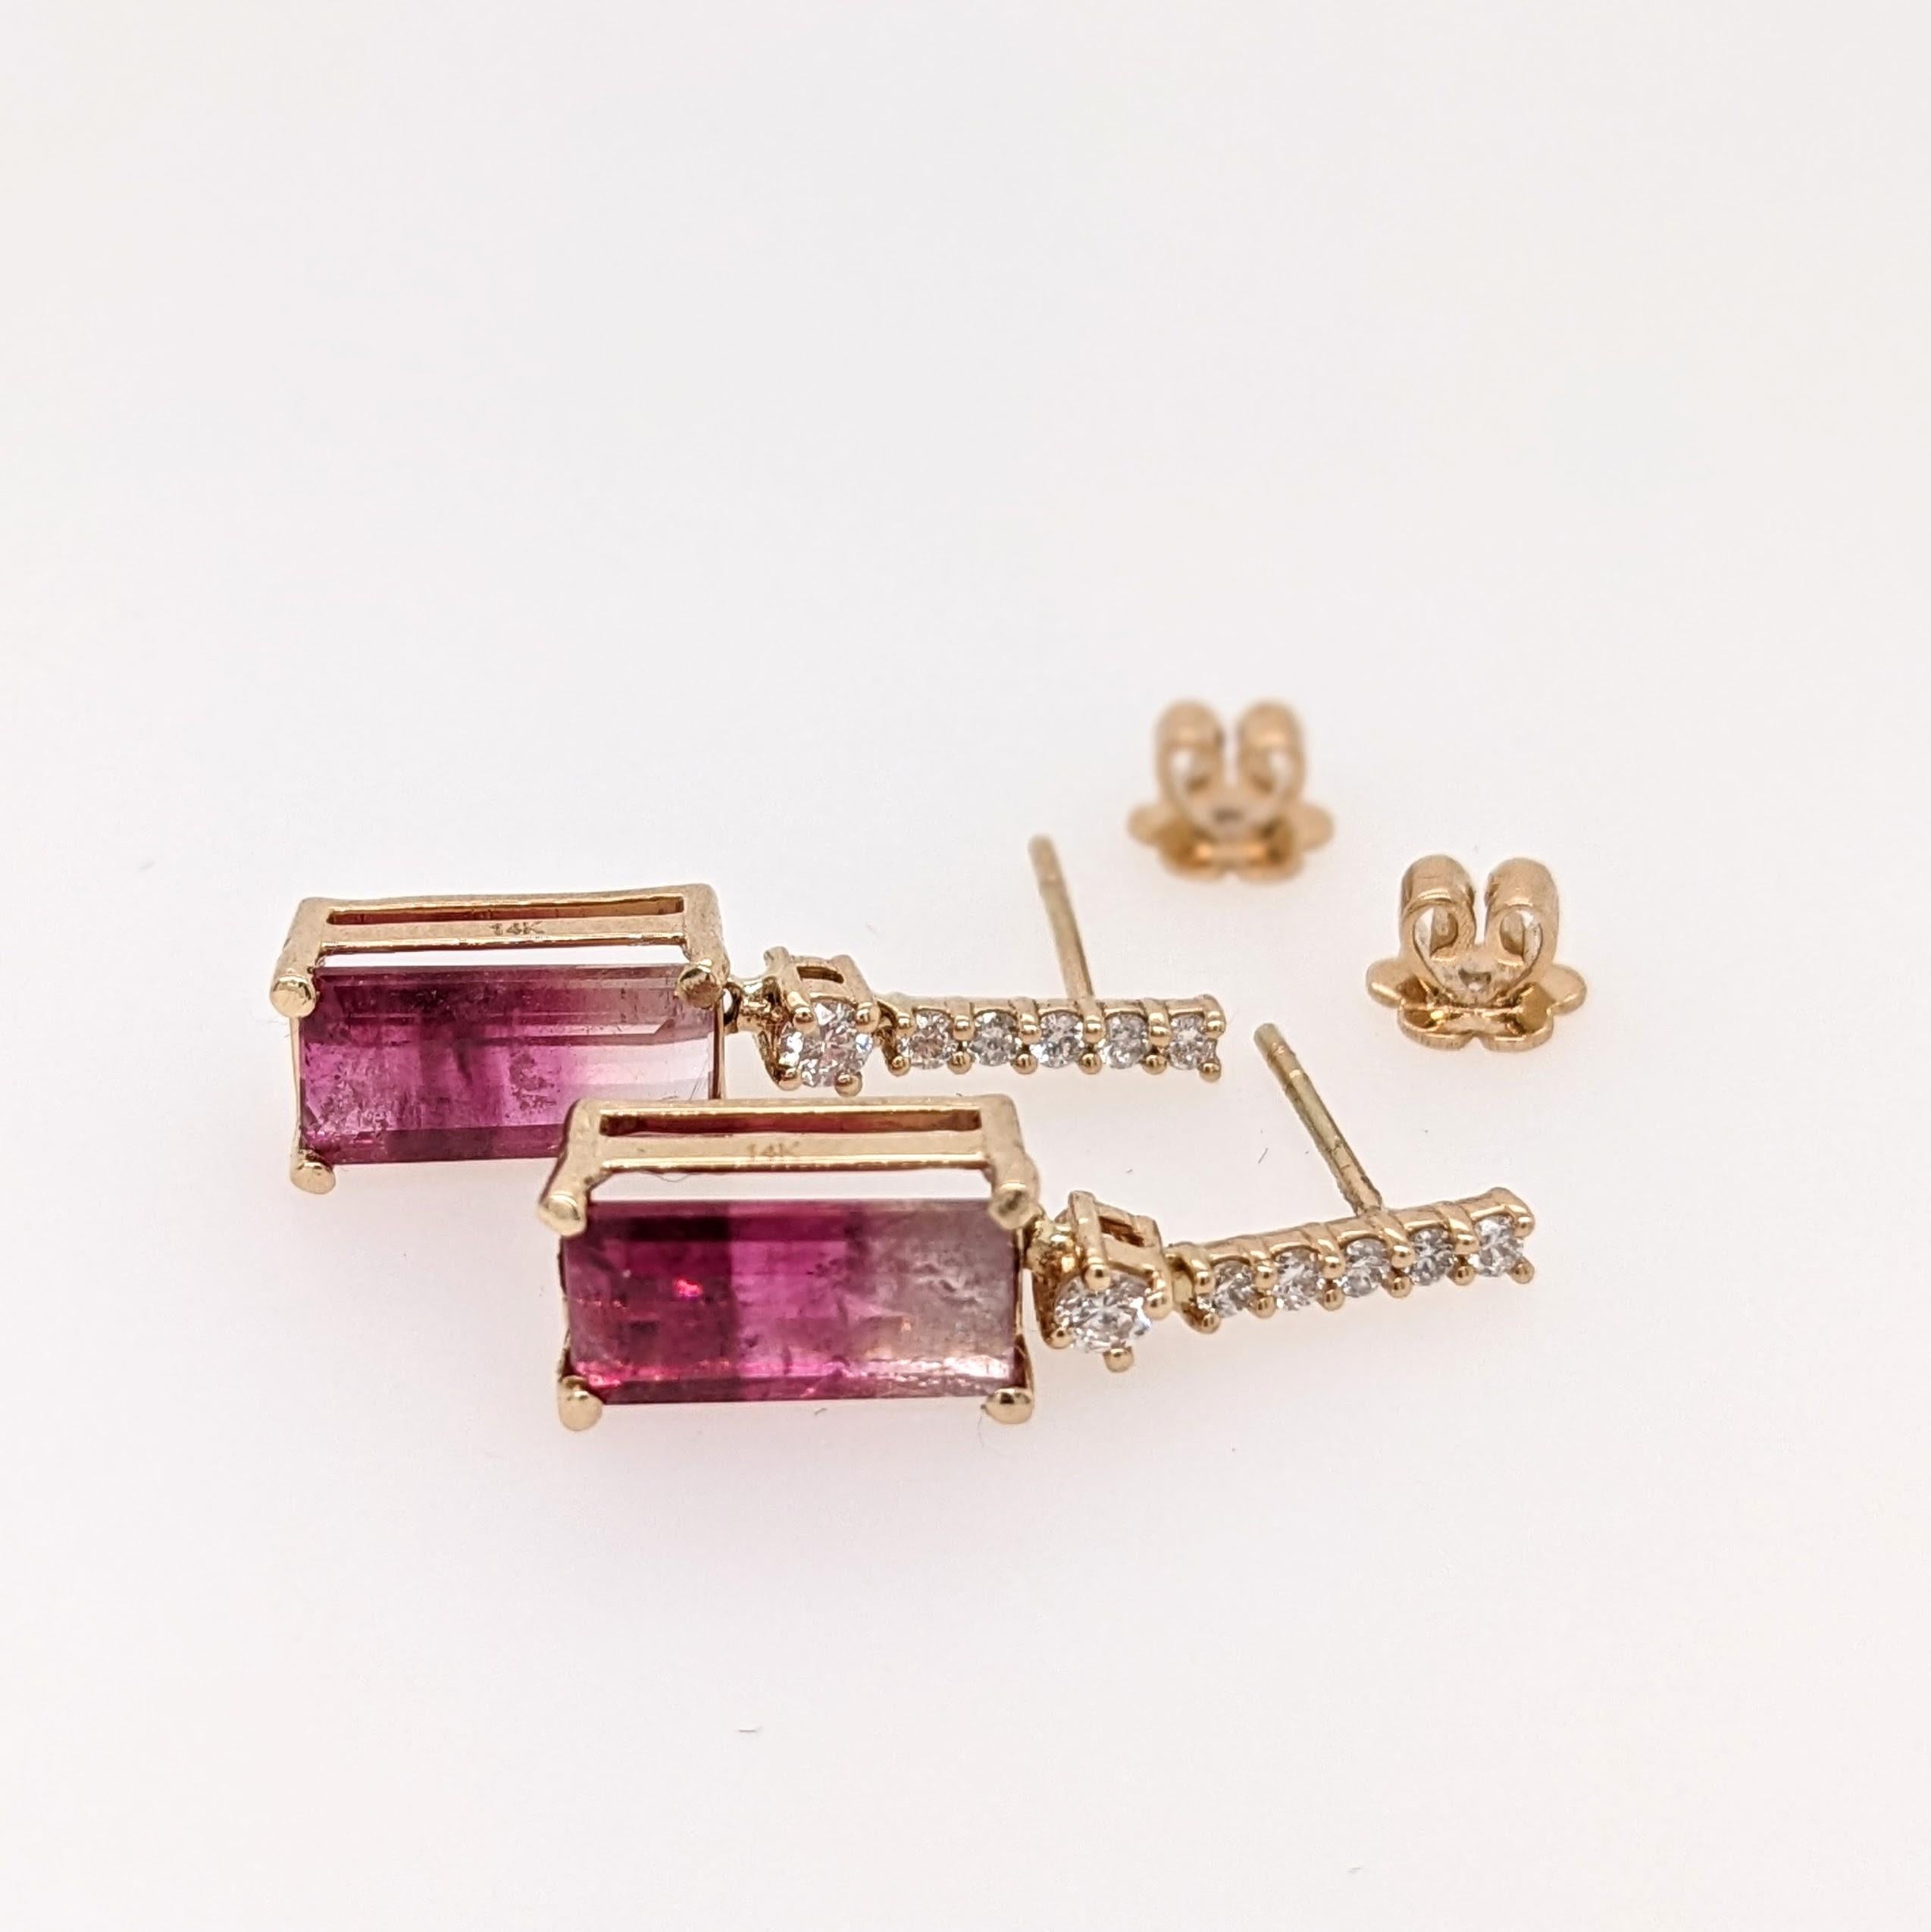 These stunning Tourmaline earrings are the perfect addition to any jewelry collection! A unique ombre of light to dark pink make this tourmaline especially beautiful!

Specifications

Item Type: Earrings
Center Stone: Tourmaline
Treatment: